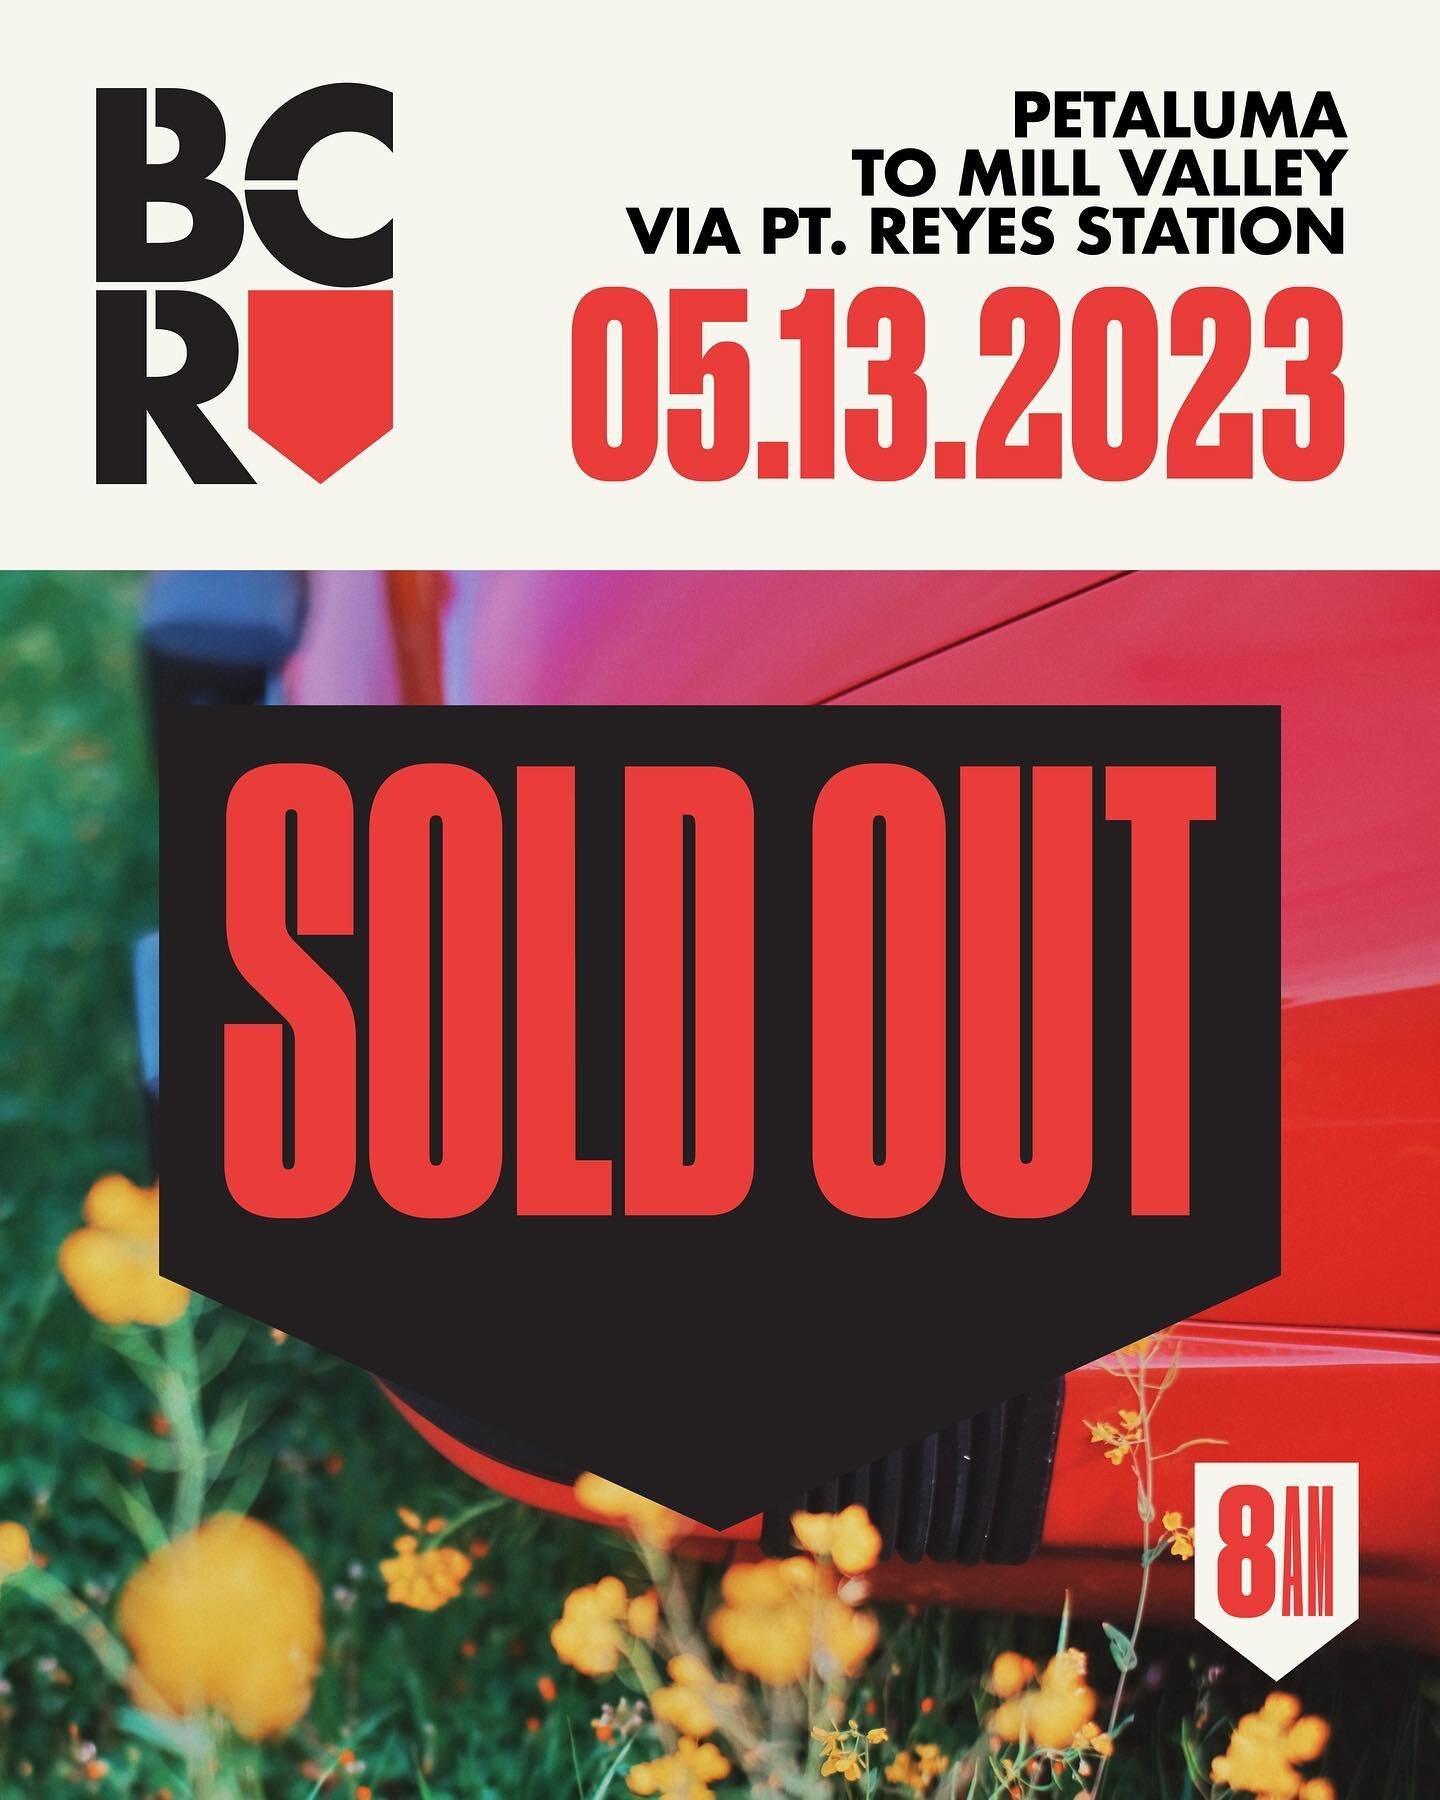 Hey! Open Registration for BCR 05.13.2023 just sold out. Thanks, people; you&rsquo;re sure to dig what&rsquo;s been planned for this month&rsquo;s rally. And if not, there&rsquo;s always next month.

-BCR HQ
#breakfastclubrally #donebynoon

&mdash;&m